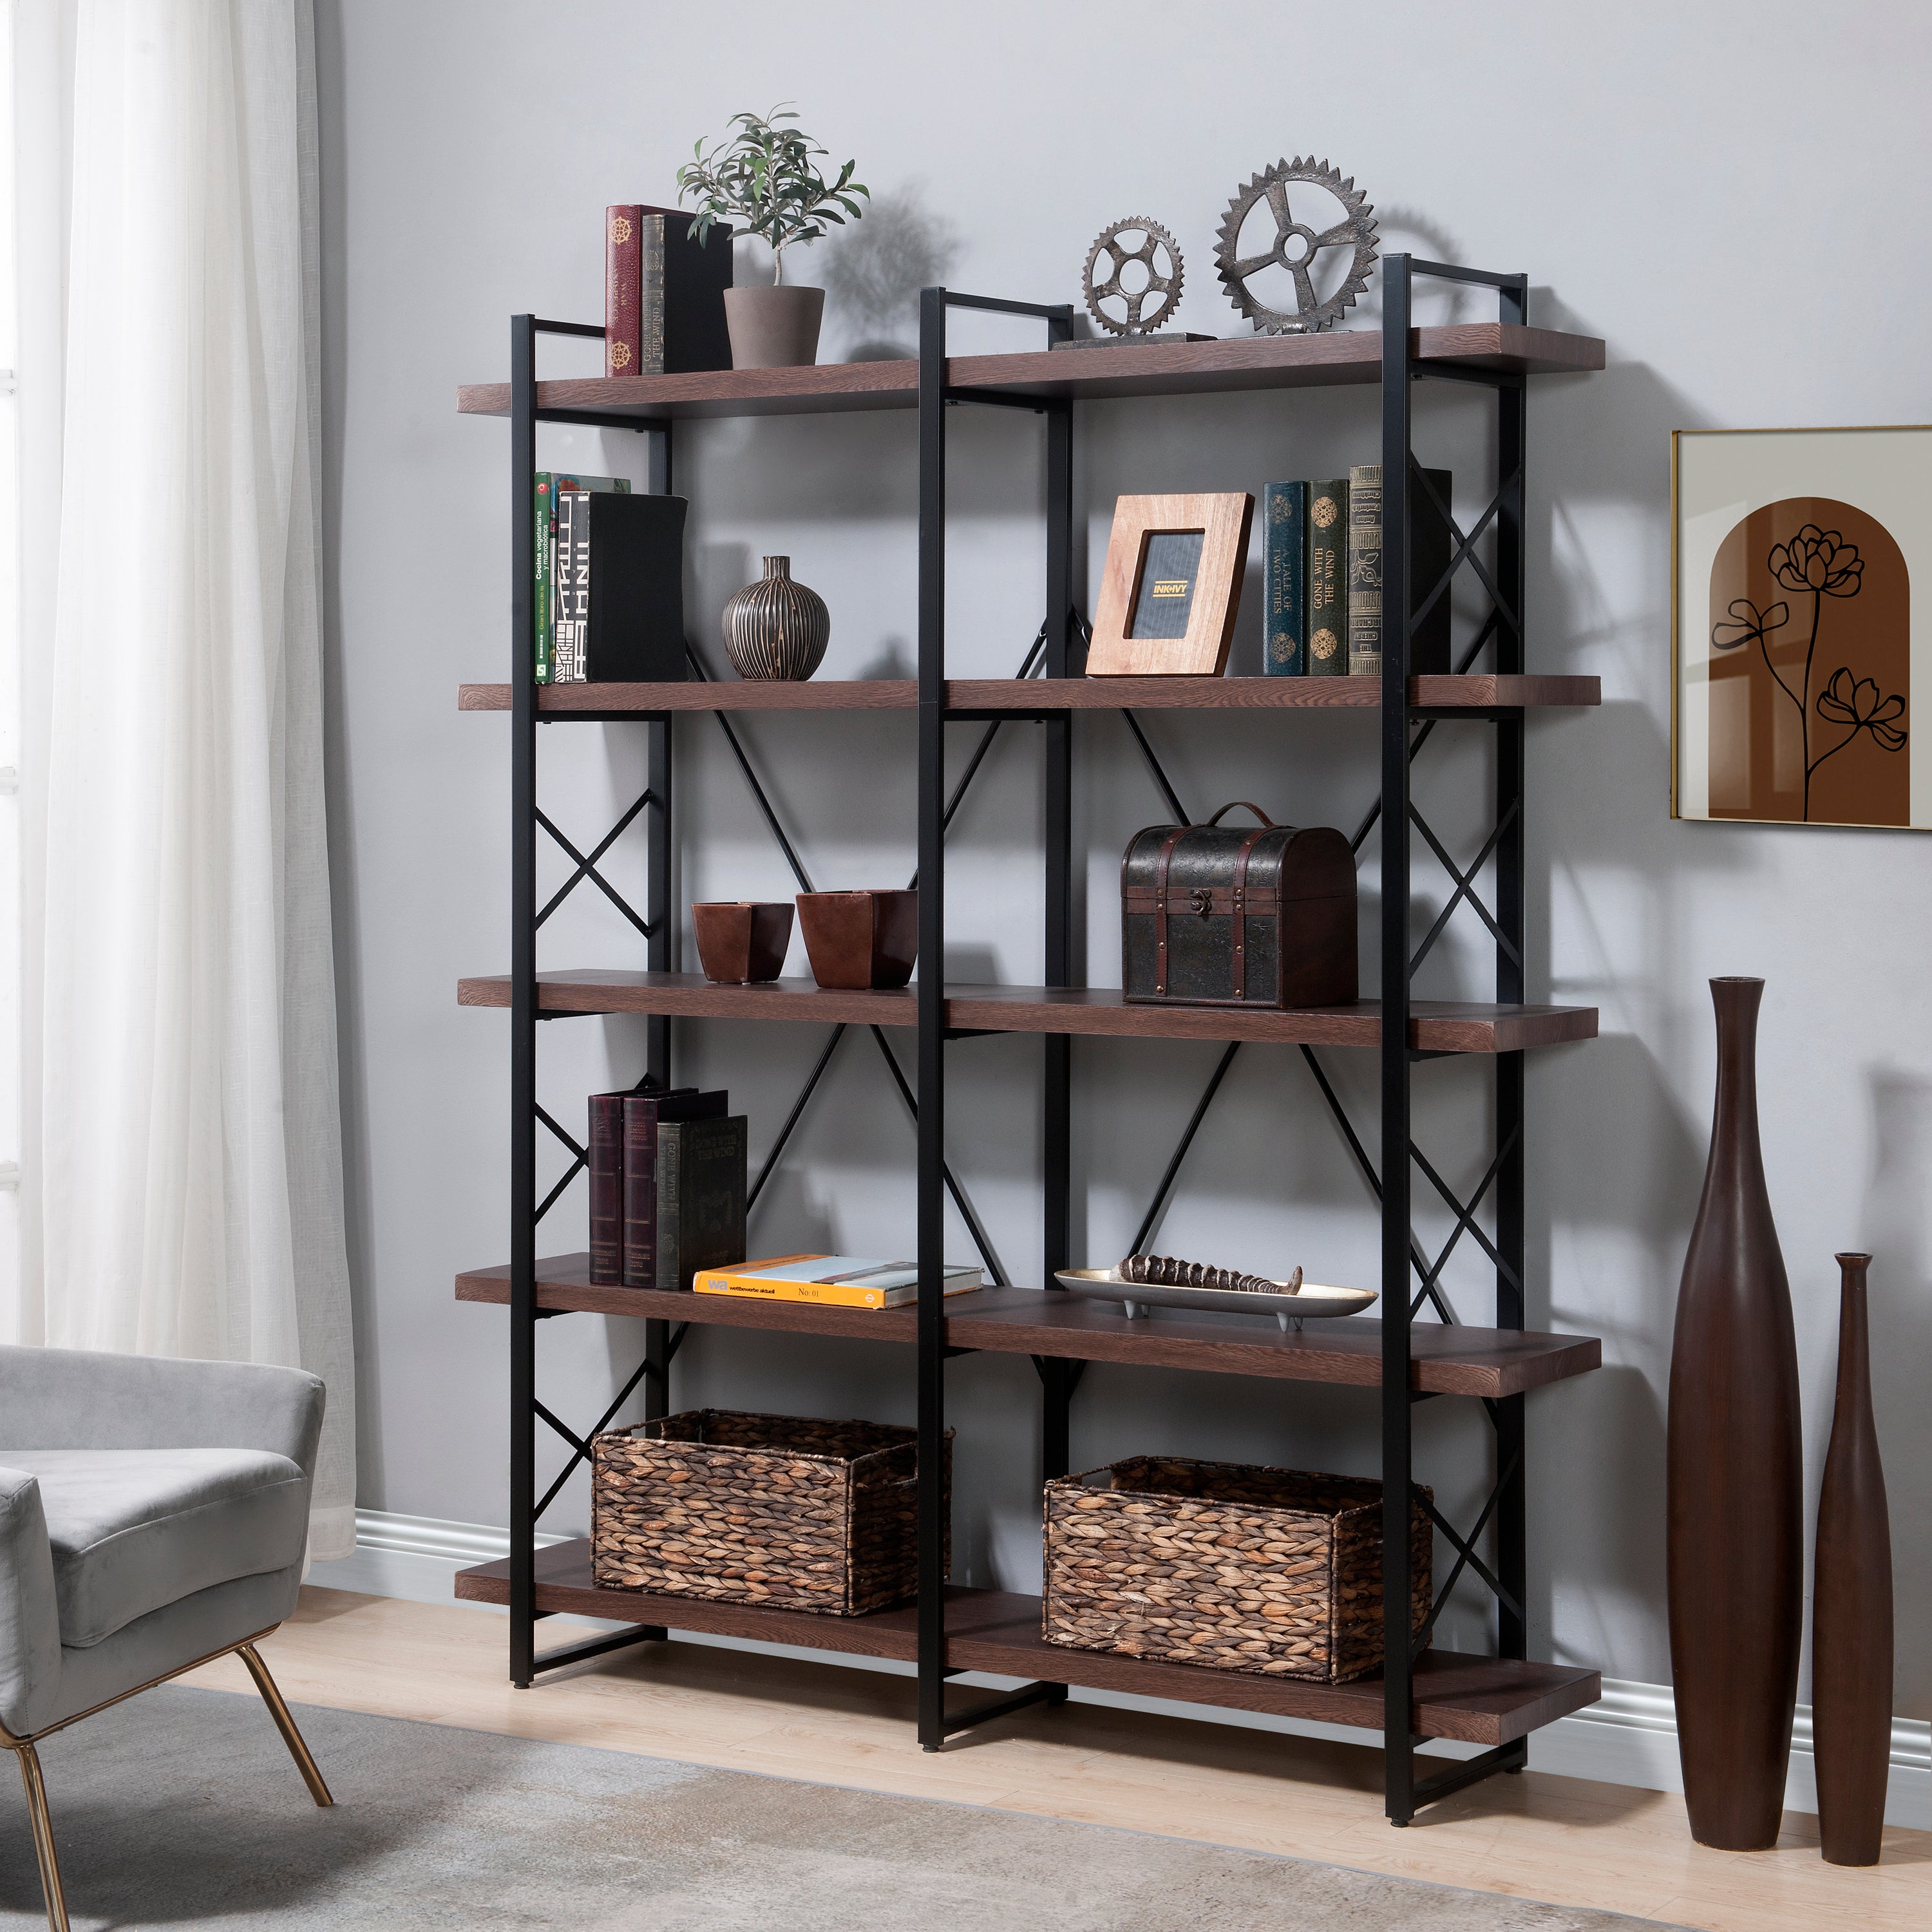 X Design Etageres Office Industrial Bookcase